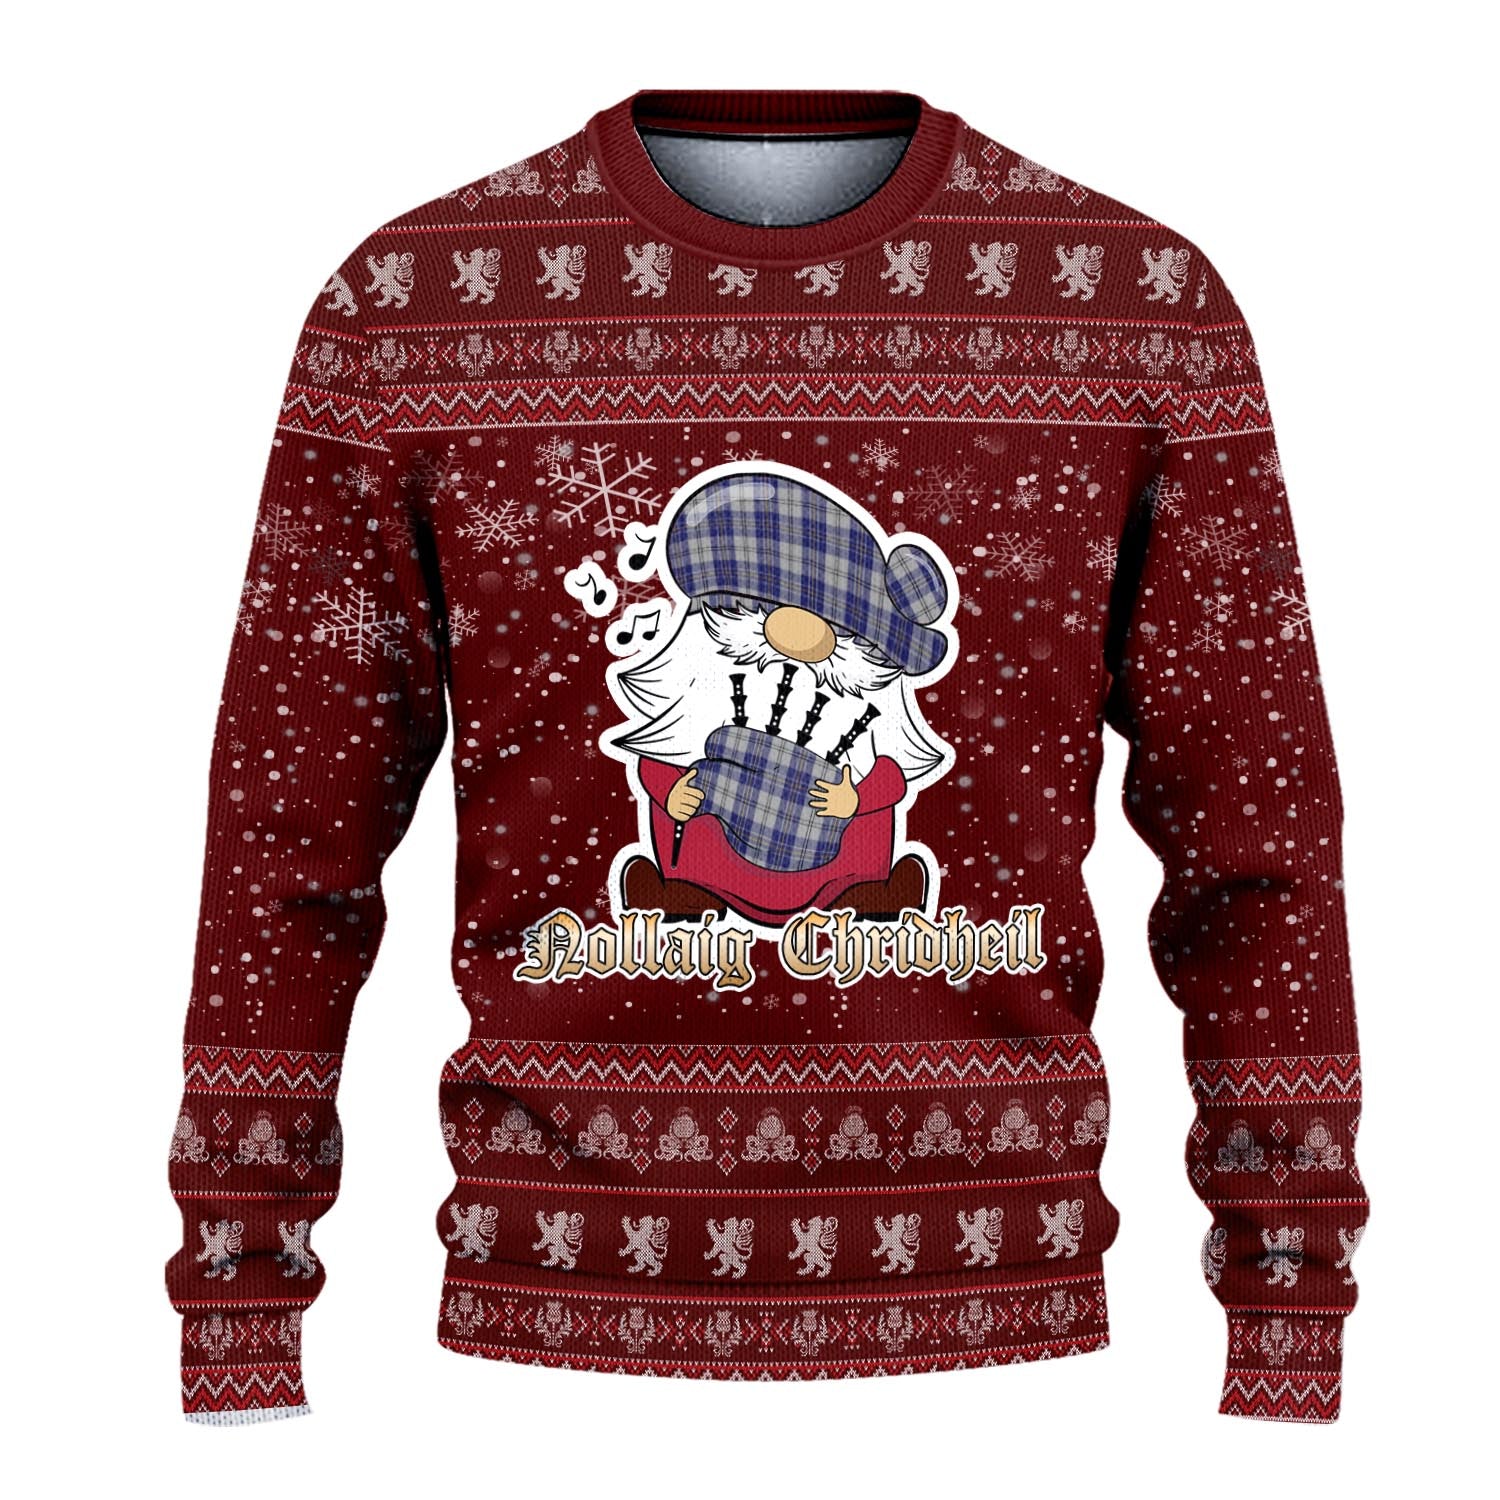 MacPherson Dress Blue Clan Christmas Family Knitted Sweater with Funny Gnome Playing Bagpipes - Tartanvibesclothing